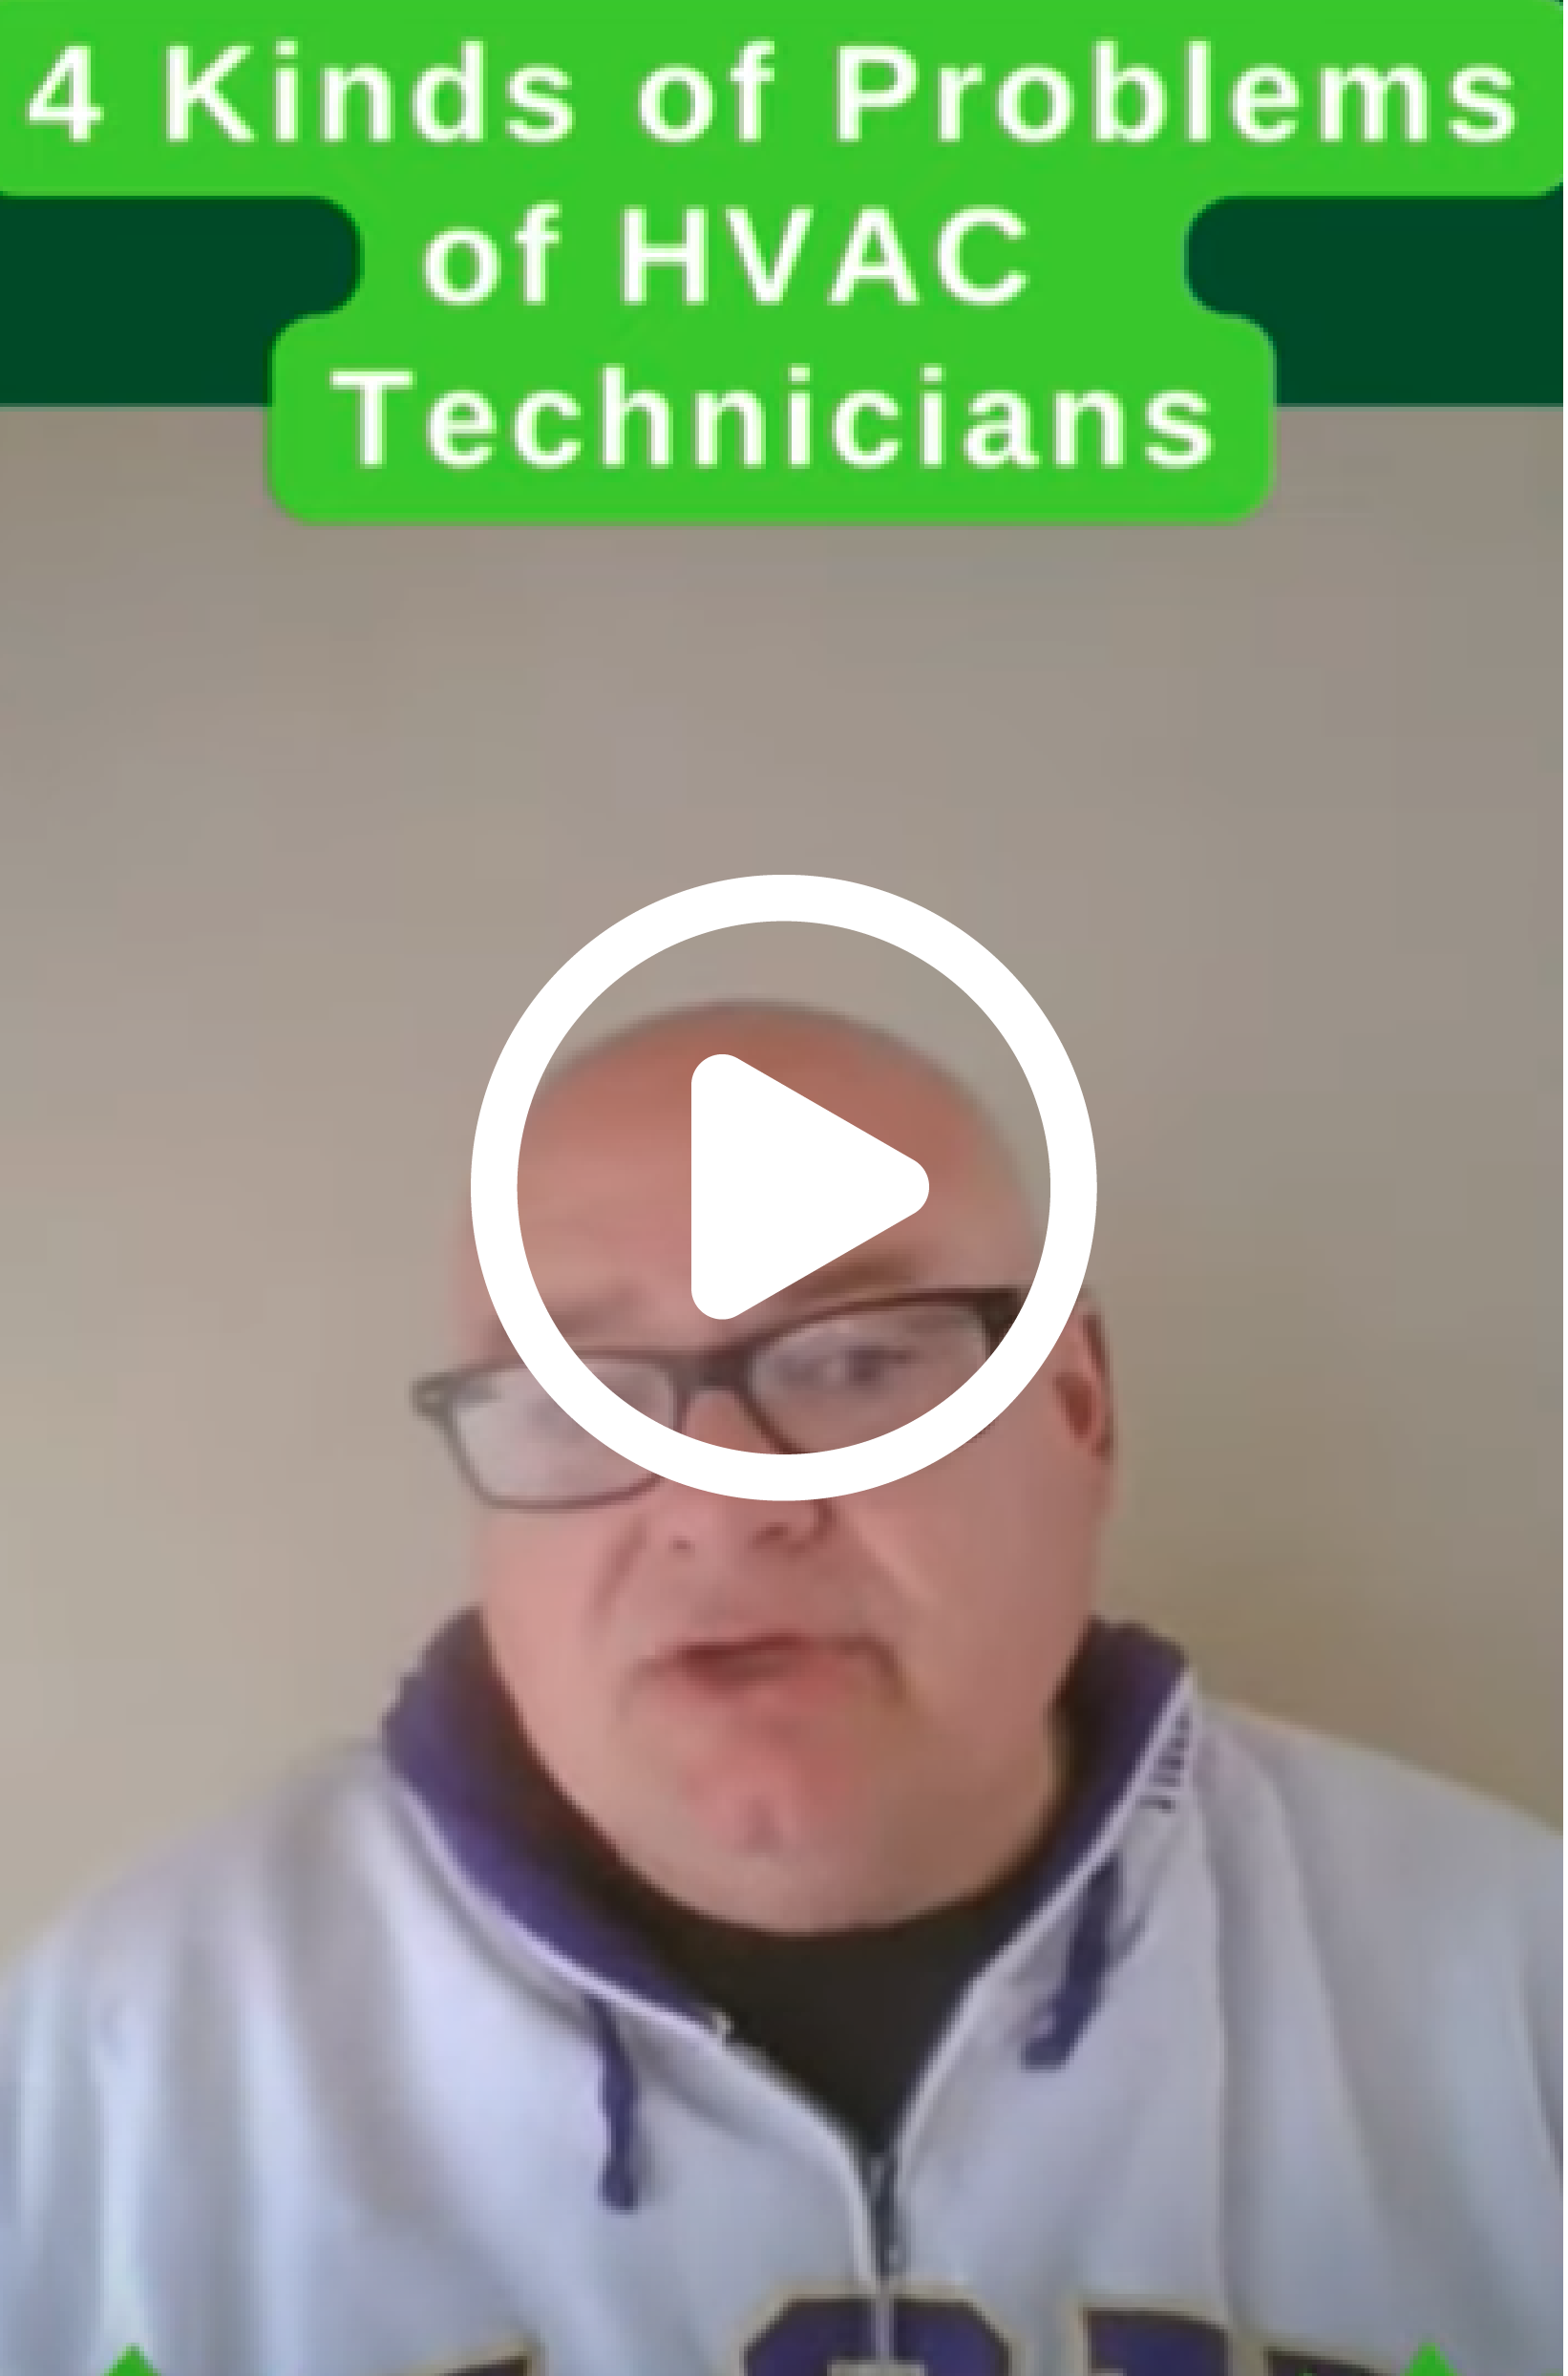 Play Video: 4 Kinds of Problems of HVAC Technicians